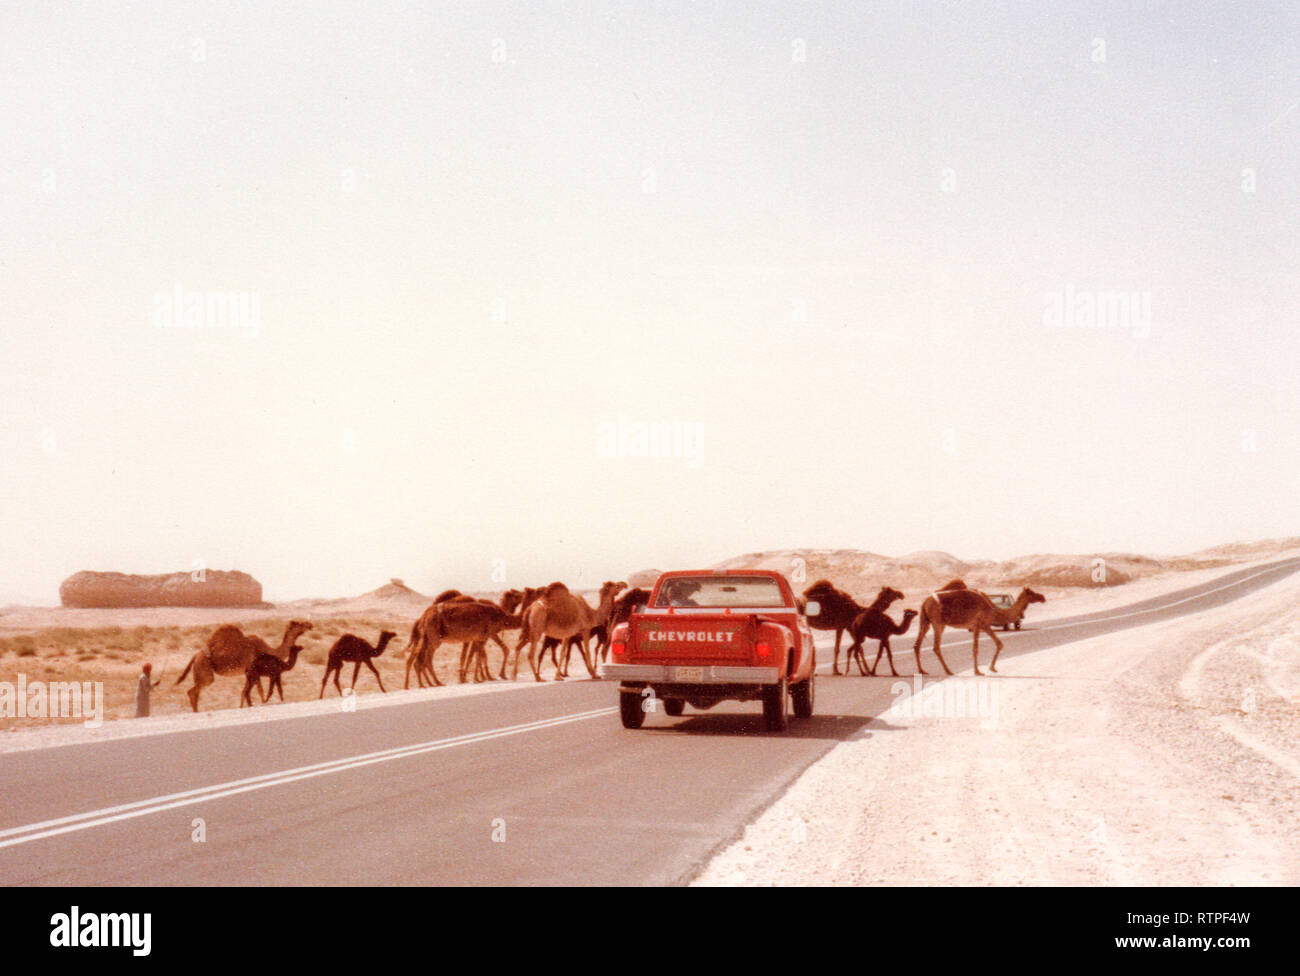 A herd of dromedary camels crosses the road in front of a pickup truck near Abqaiq, Saudi Arabia on the way to Quarrayah Beach. Stock Photo